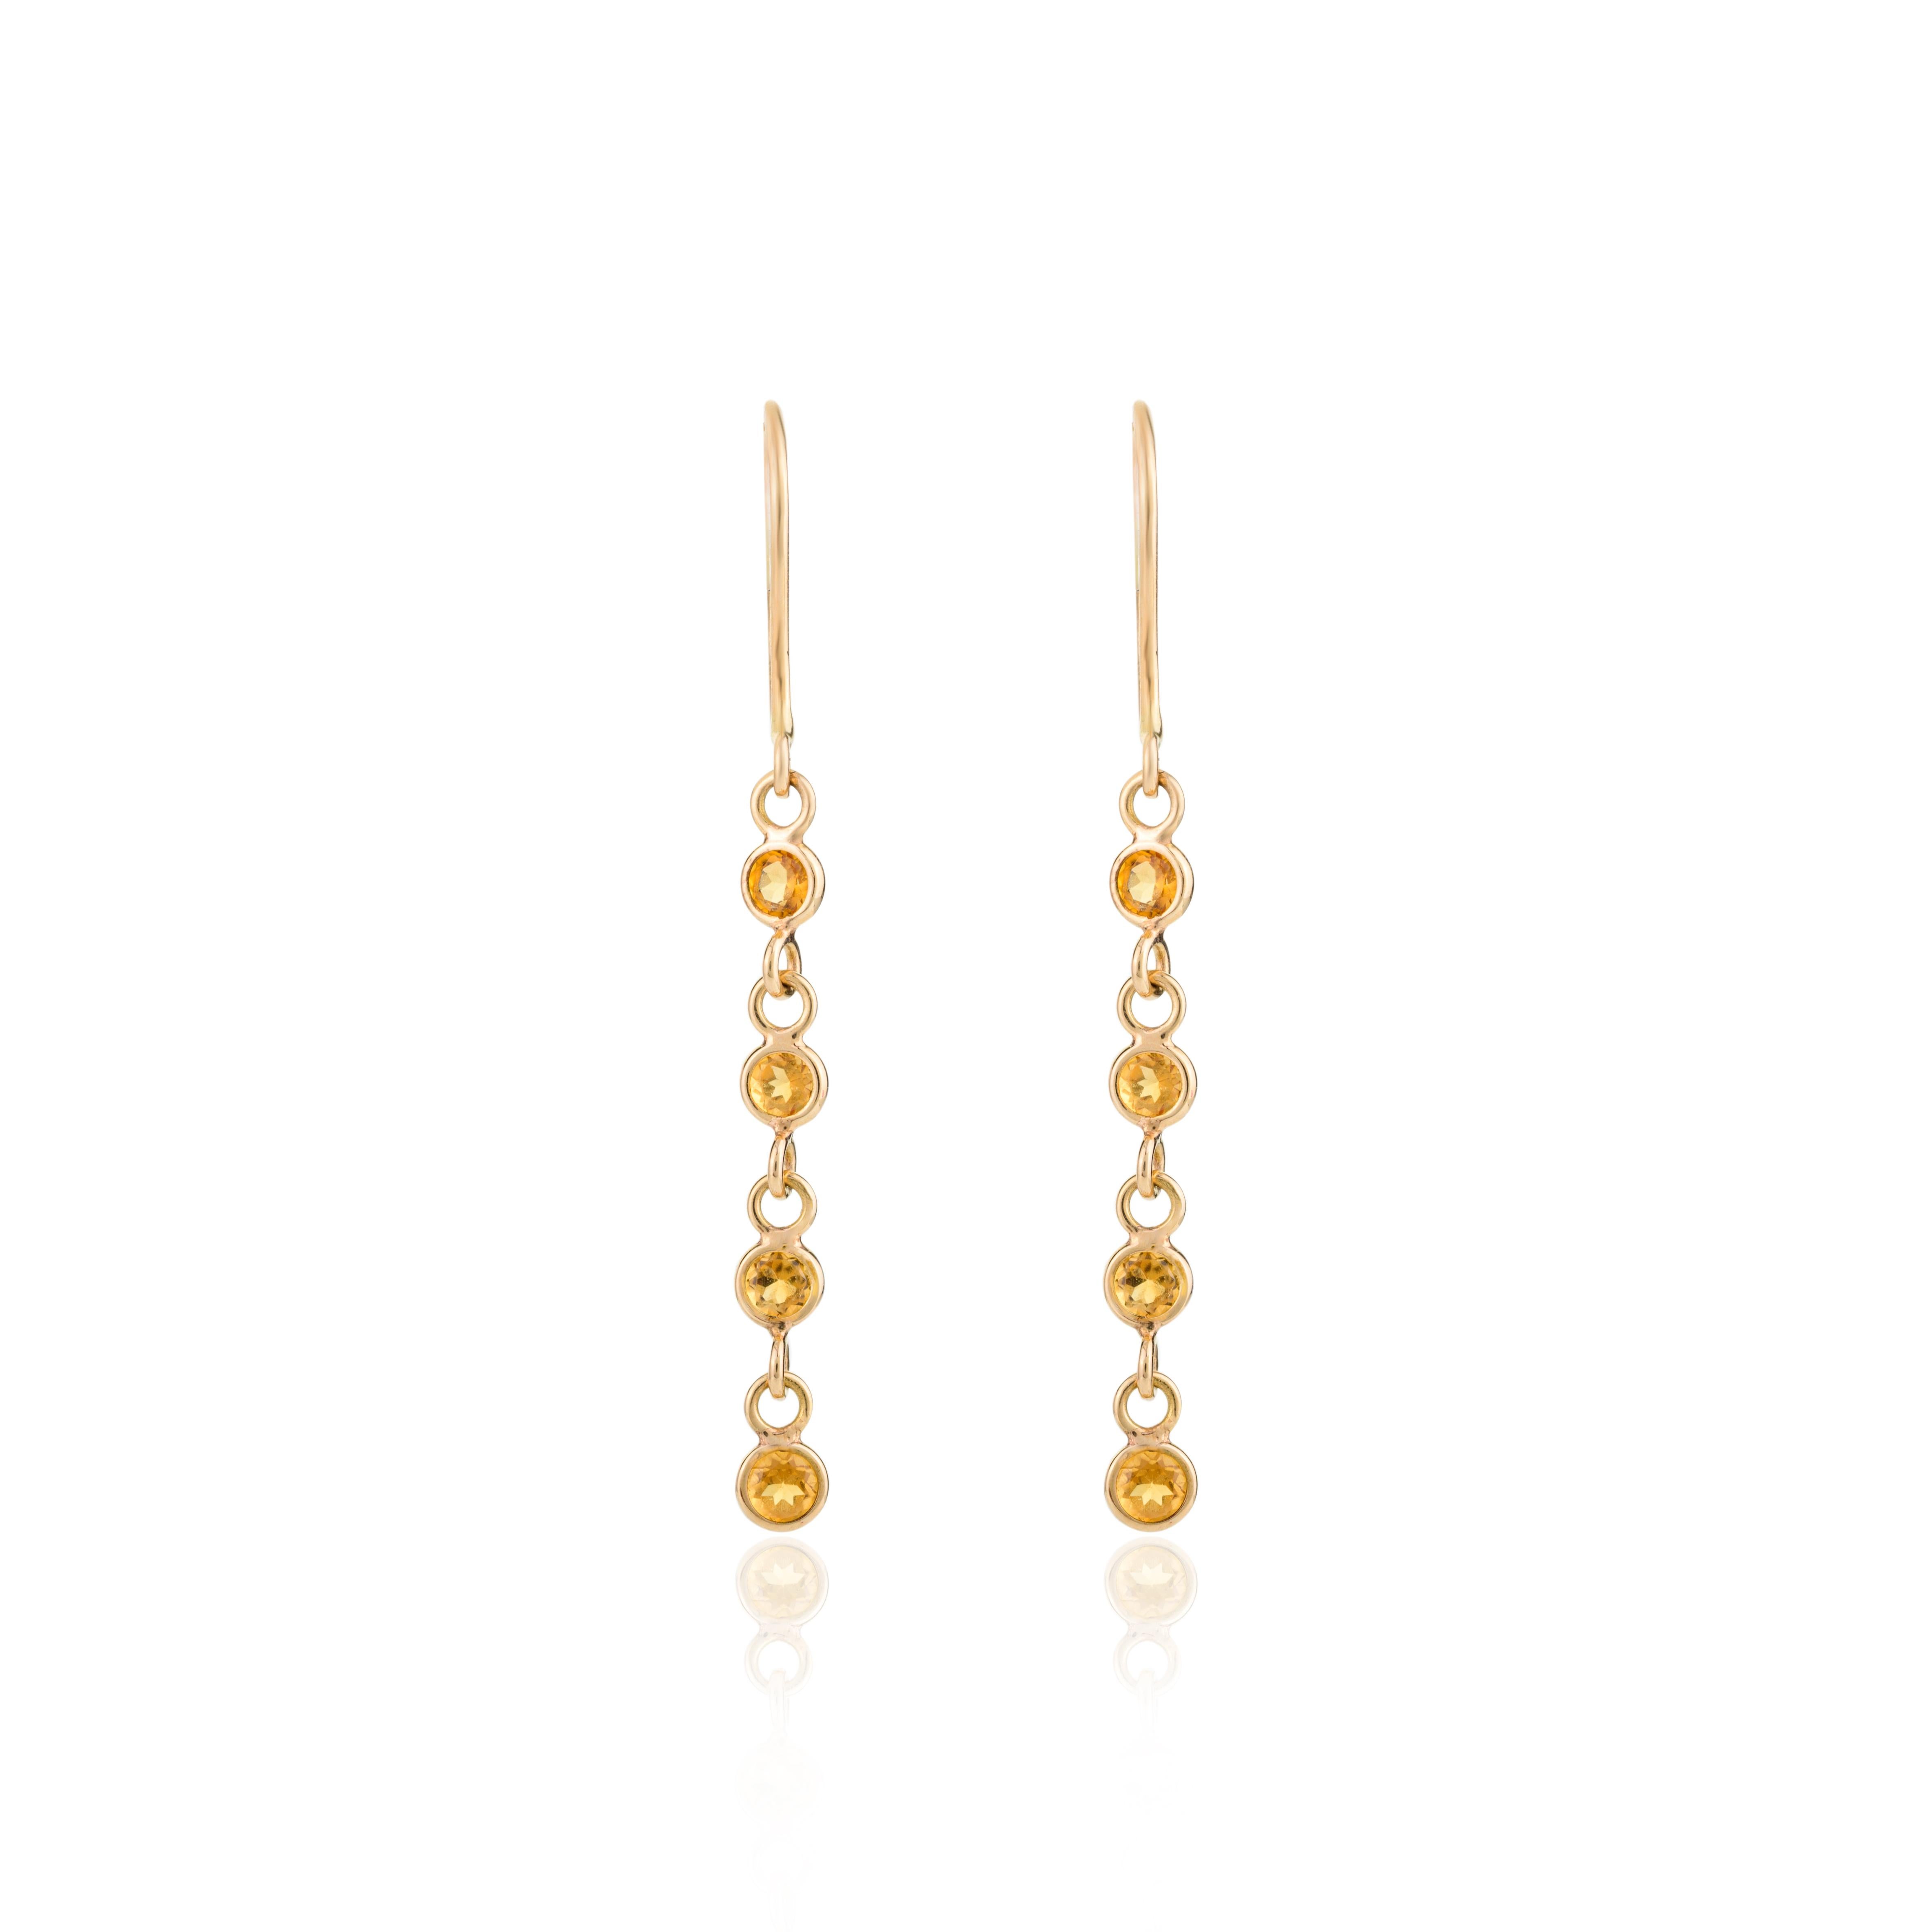 Tiny Citrine Dangle Earrings in 18K Gold to make a statement with your look. You shall need dangle earrings to make a statement with your look. These earrings create a sparkling, luxurious look featuring round cut citrine.
Citrine has strong